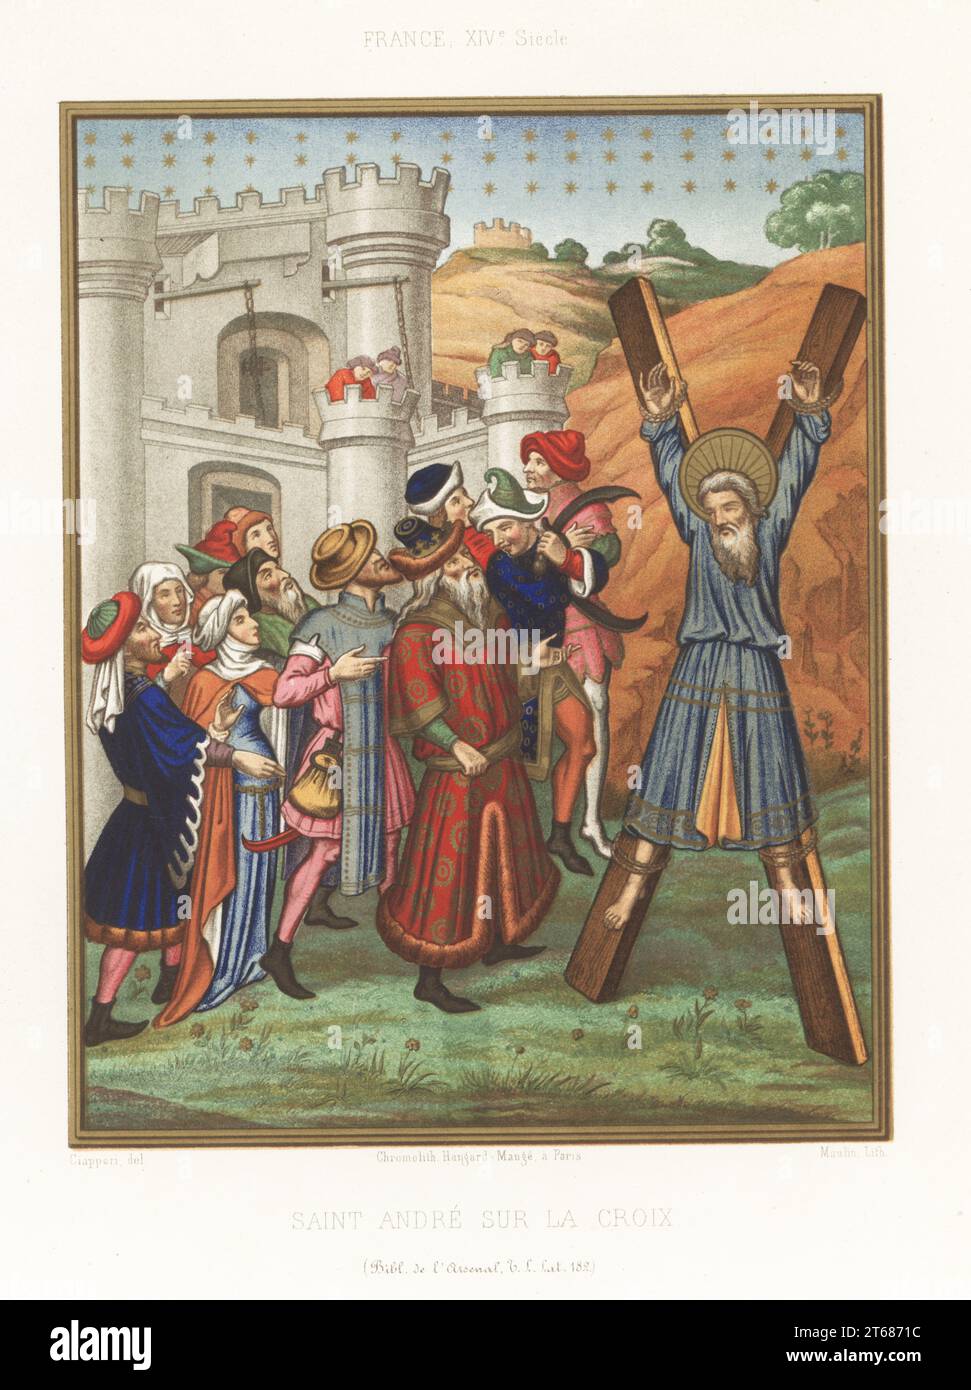 Saint Andrew the Apostle crucified on an x-shaped cross outside a castle in Patras, c.60 AD. Some of the 14th century costumes appear fantastic, and the whole resembles Flemish art. From a missal made for Denis du Moulin, Bishop of Paris, MS 182, Bibliotheque de l'Arsenal. France XIVe Siecle. Saint Andre sur la Croix. Chromolithograph by Moulin after an illustration by Claudius Joseph Ciappori from Charles Louandres Les Arts Somptuaires, The Sumptuary Arts, Hangard-Mauge, Paris, 1858. Stock Photo